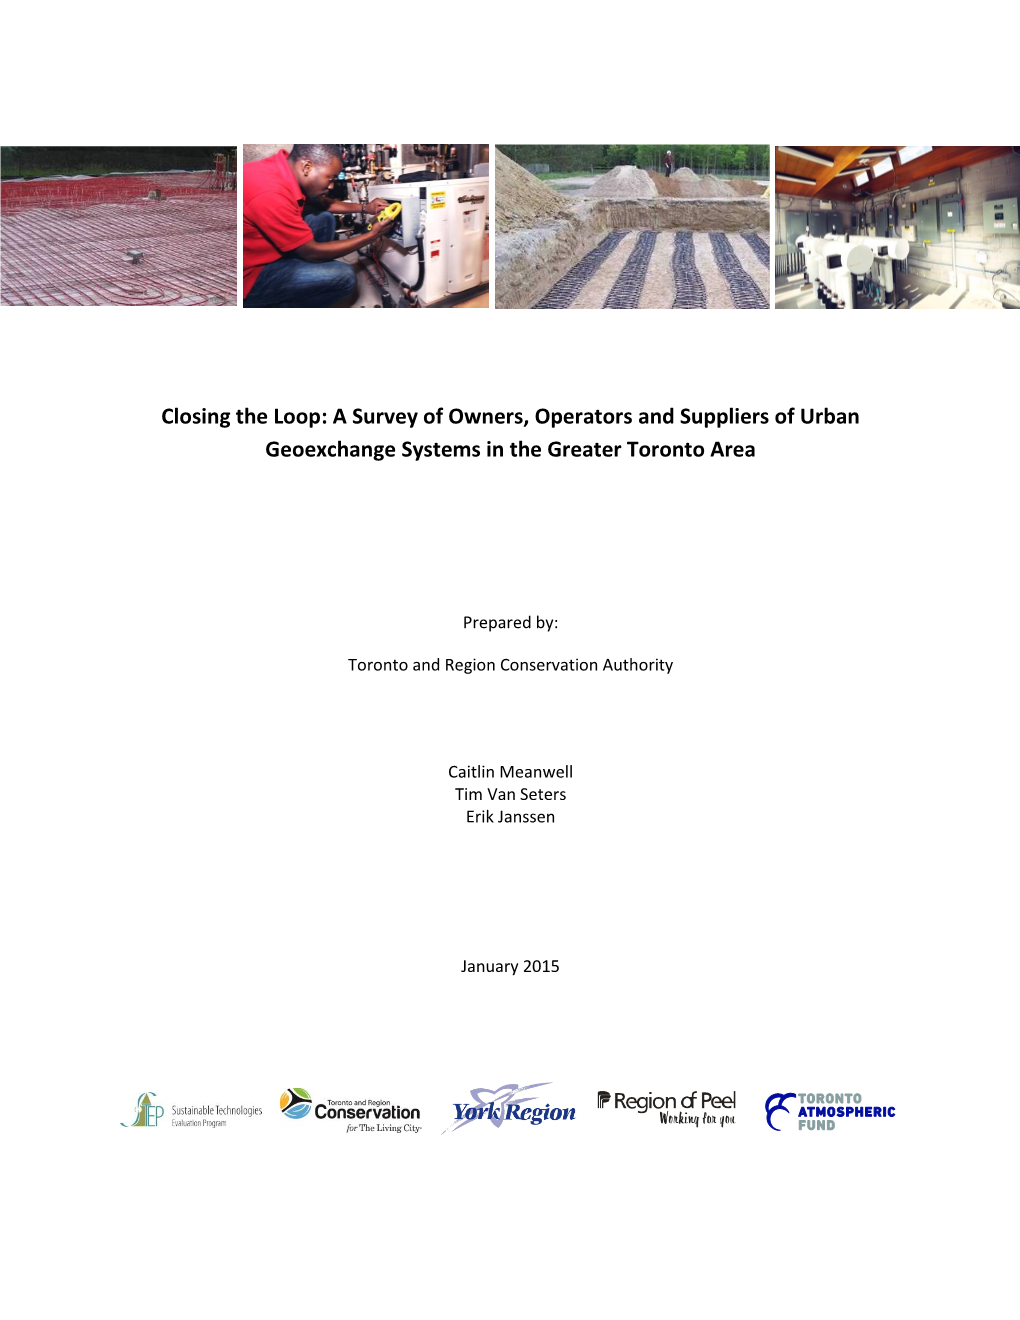 Closing the Loop: a Survey of Owners, Operators and Suppliers of Urban Geoexchange Systems in the Greater Toronto Area